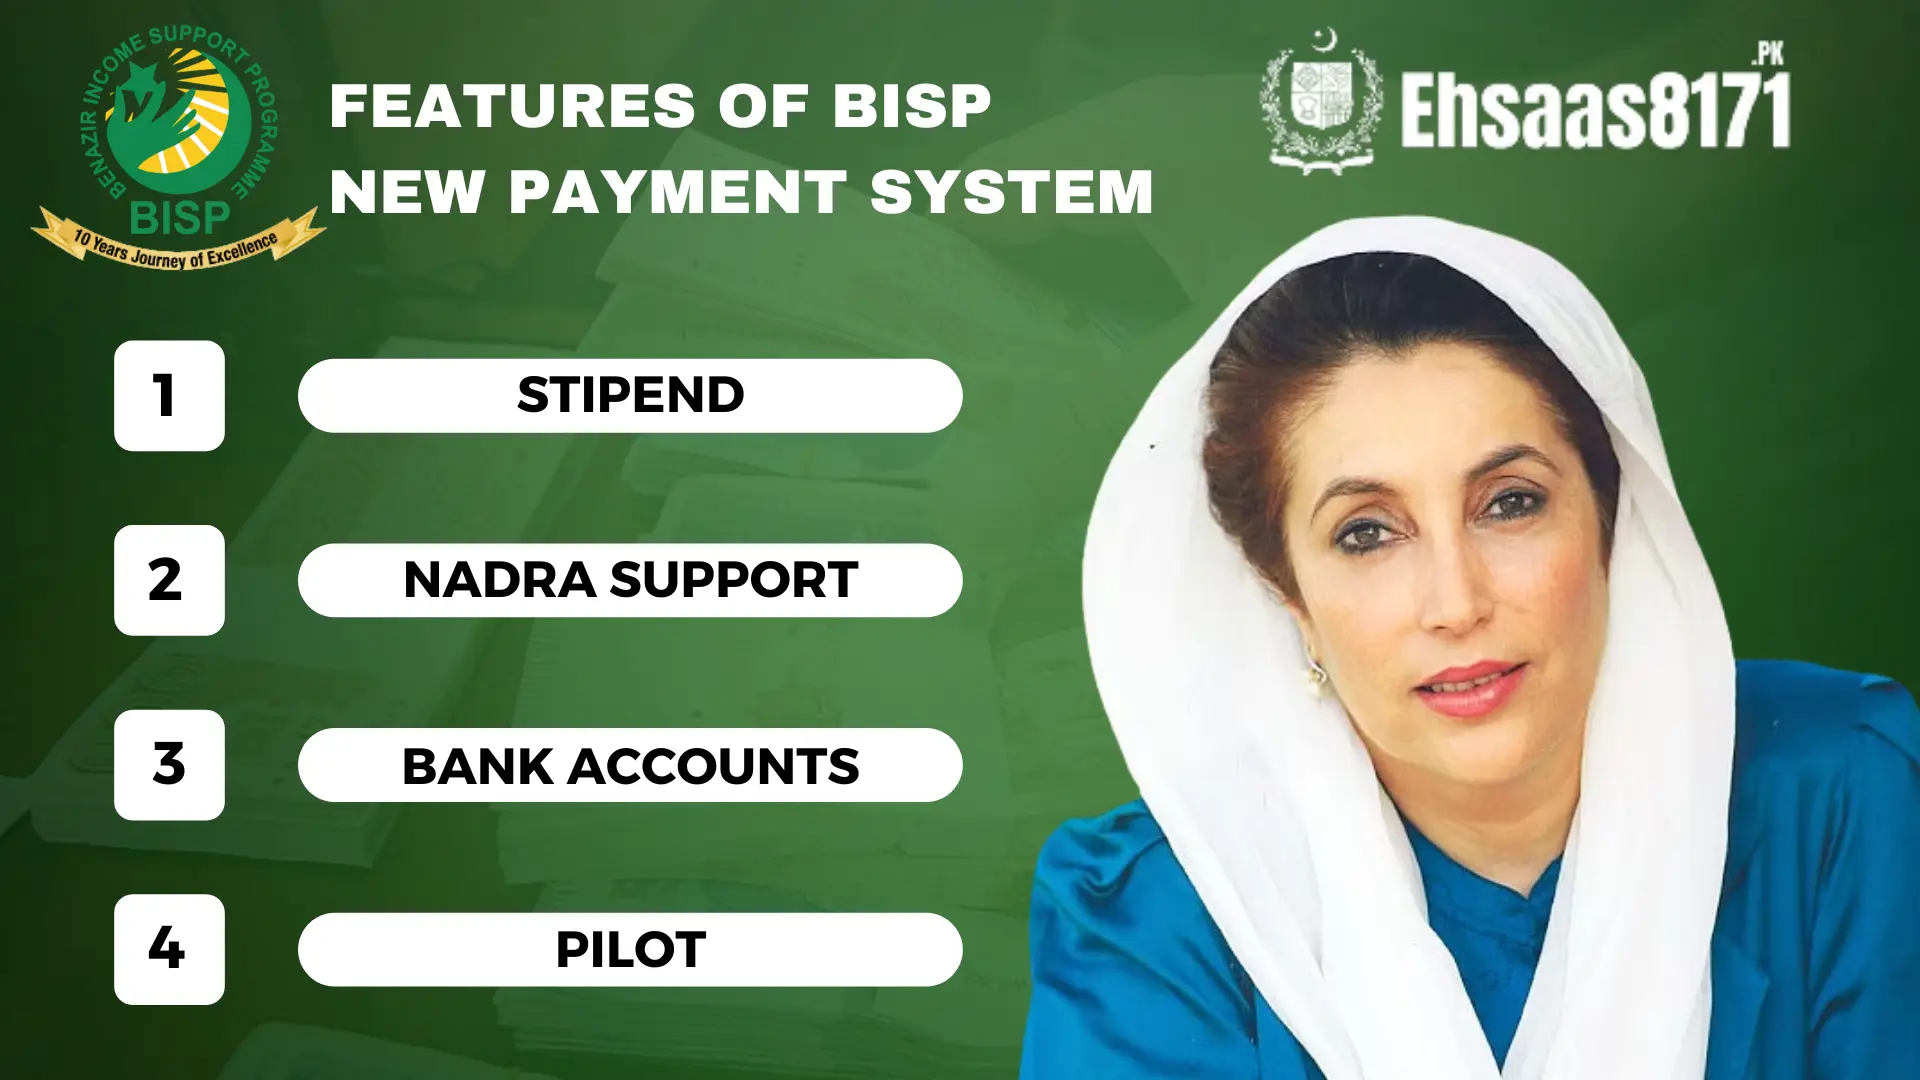 Features of BISP New Payment System